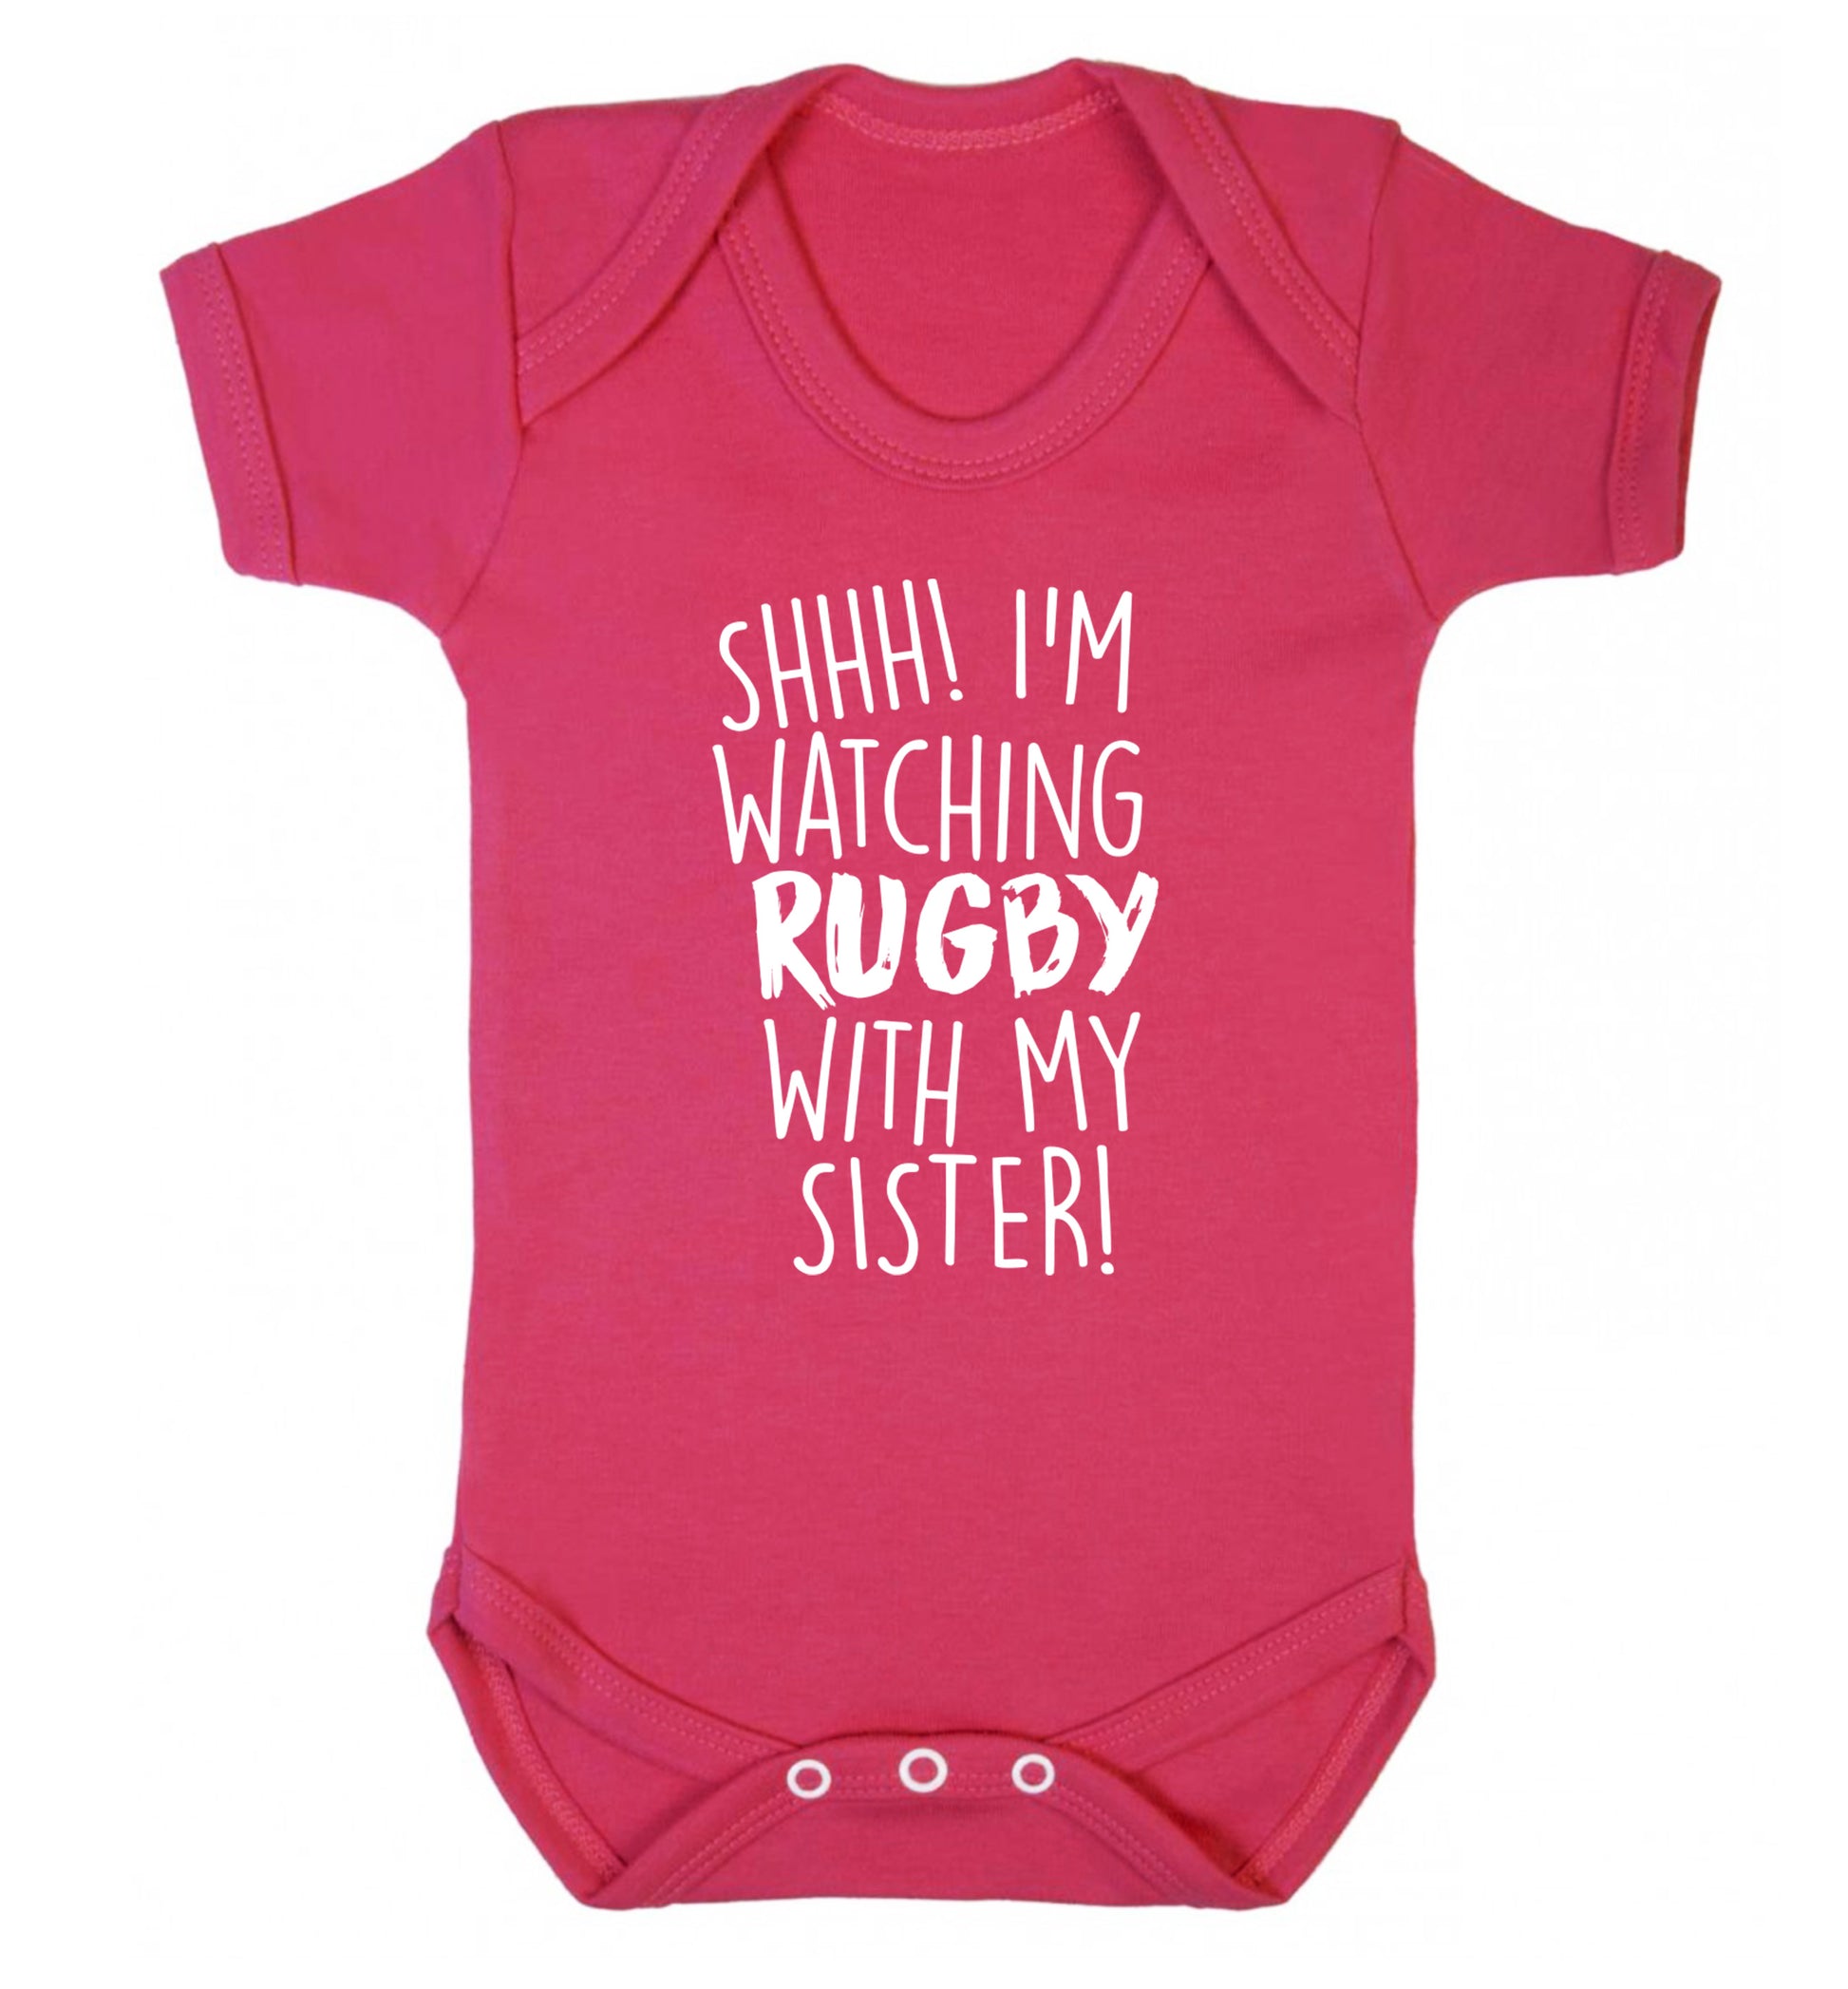 Shh... I'm watching rugby with my sister Baby Vest dark pink 18-24 months